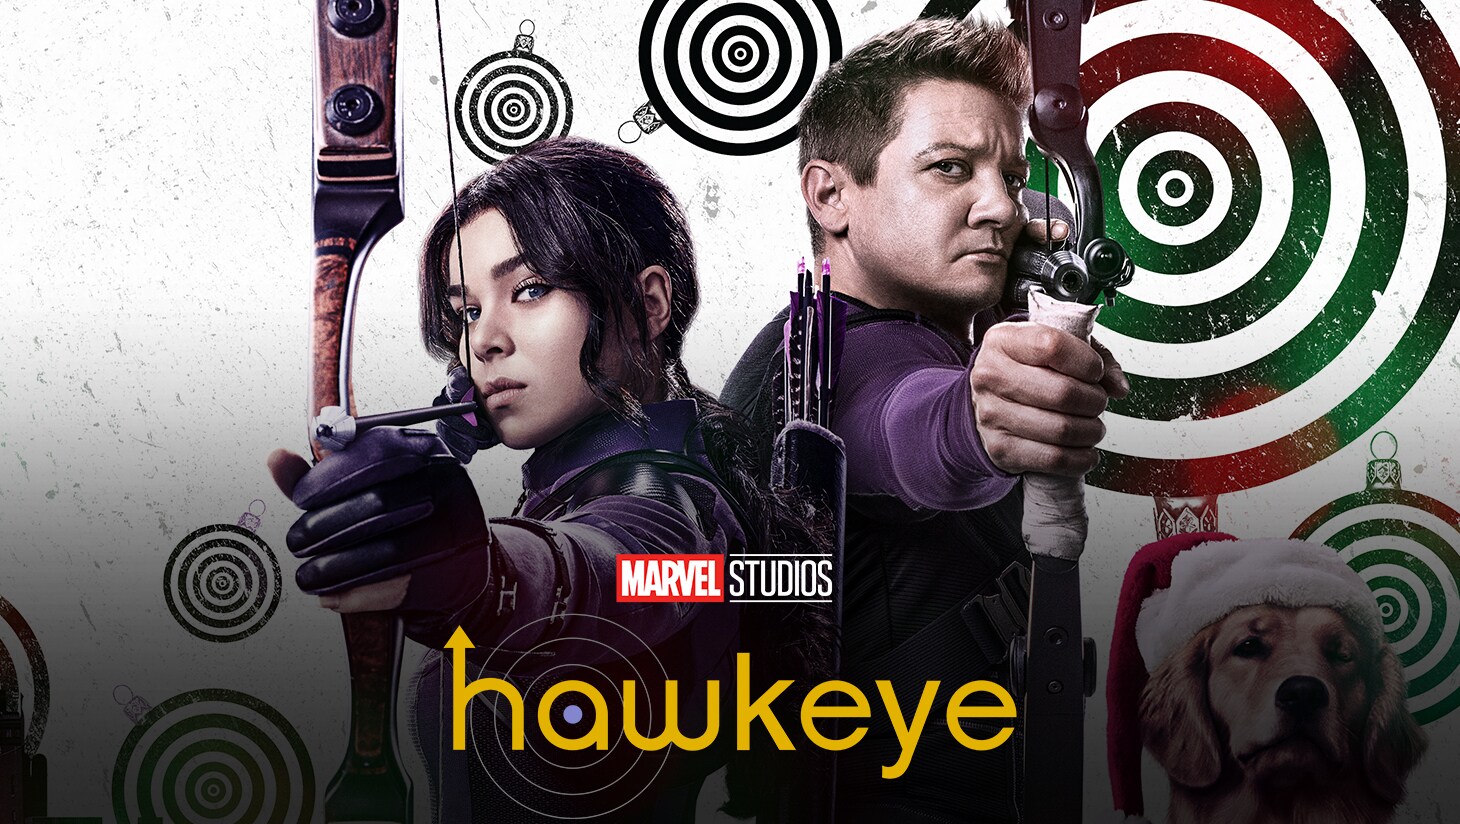 Hawkeye keyart featuring Hailee Steinfeld as Kate Bishop, and Jeremy Renner as Clint Barton pointing bows with arrows drawn, at the viewer.